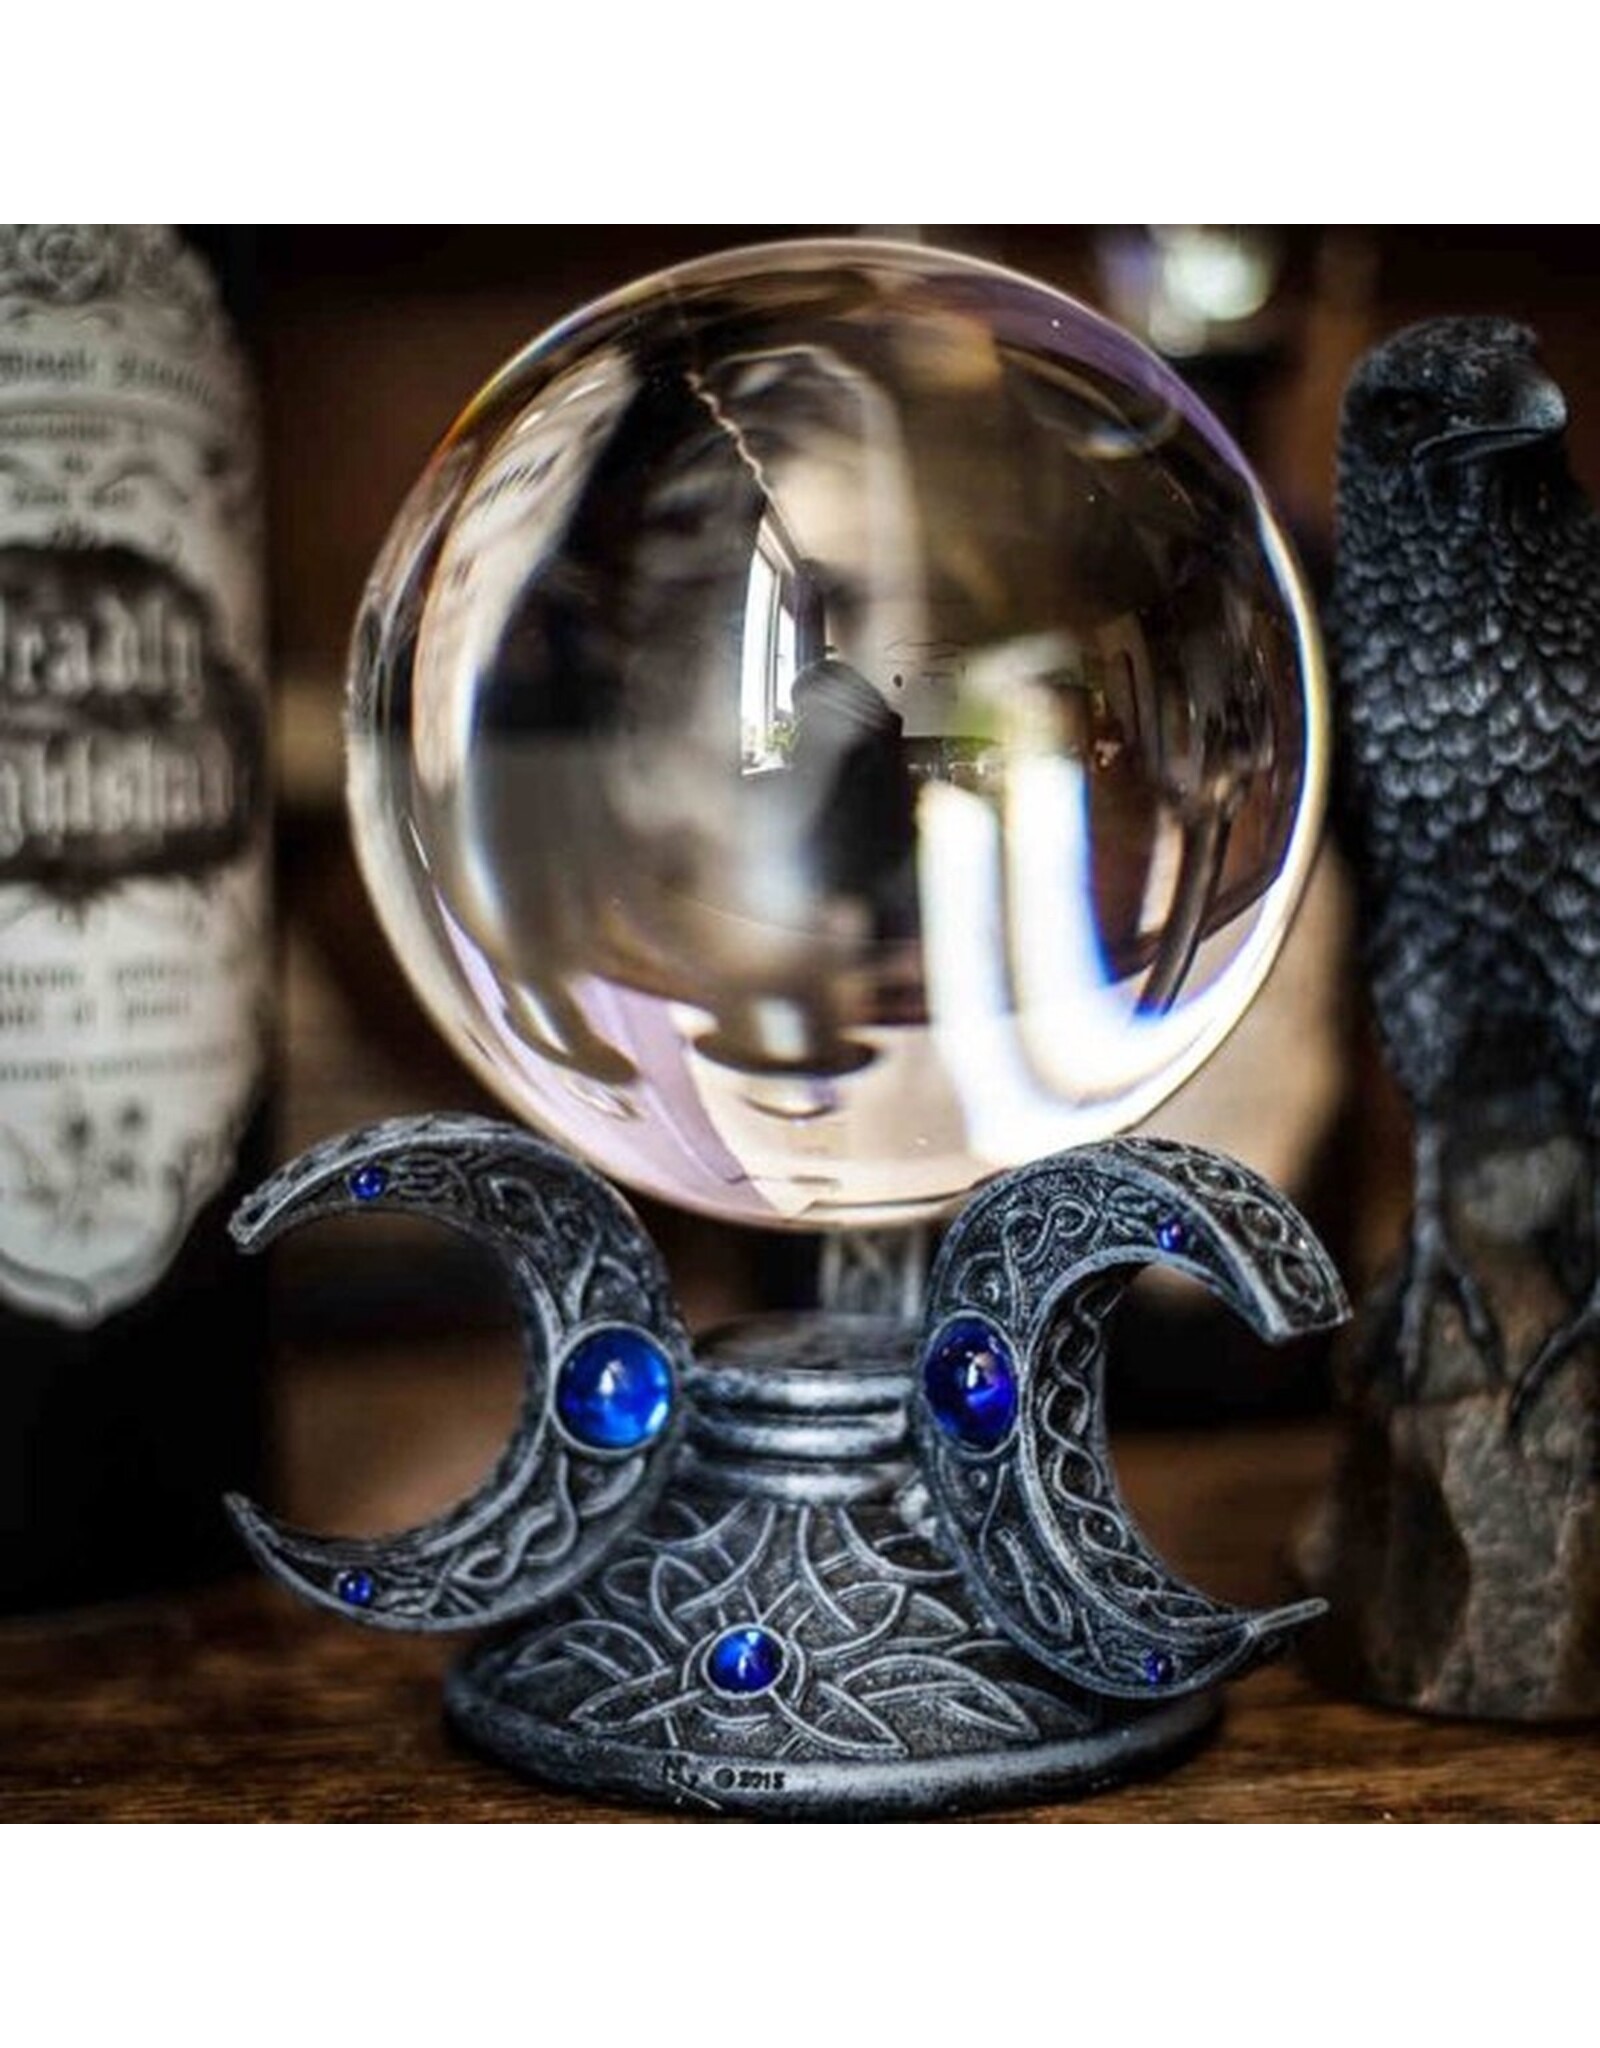 NemesisNow Miscellaneous -  Wiccan Witchcraft Divination Crystal Ball 11cm with ball holder